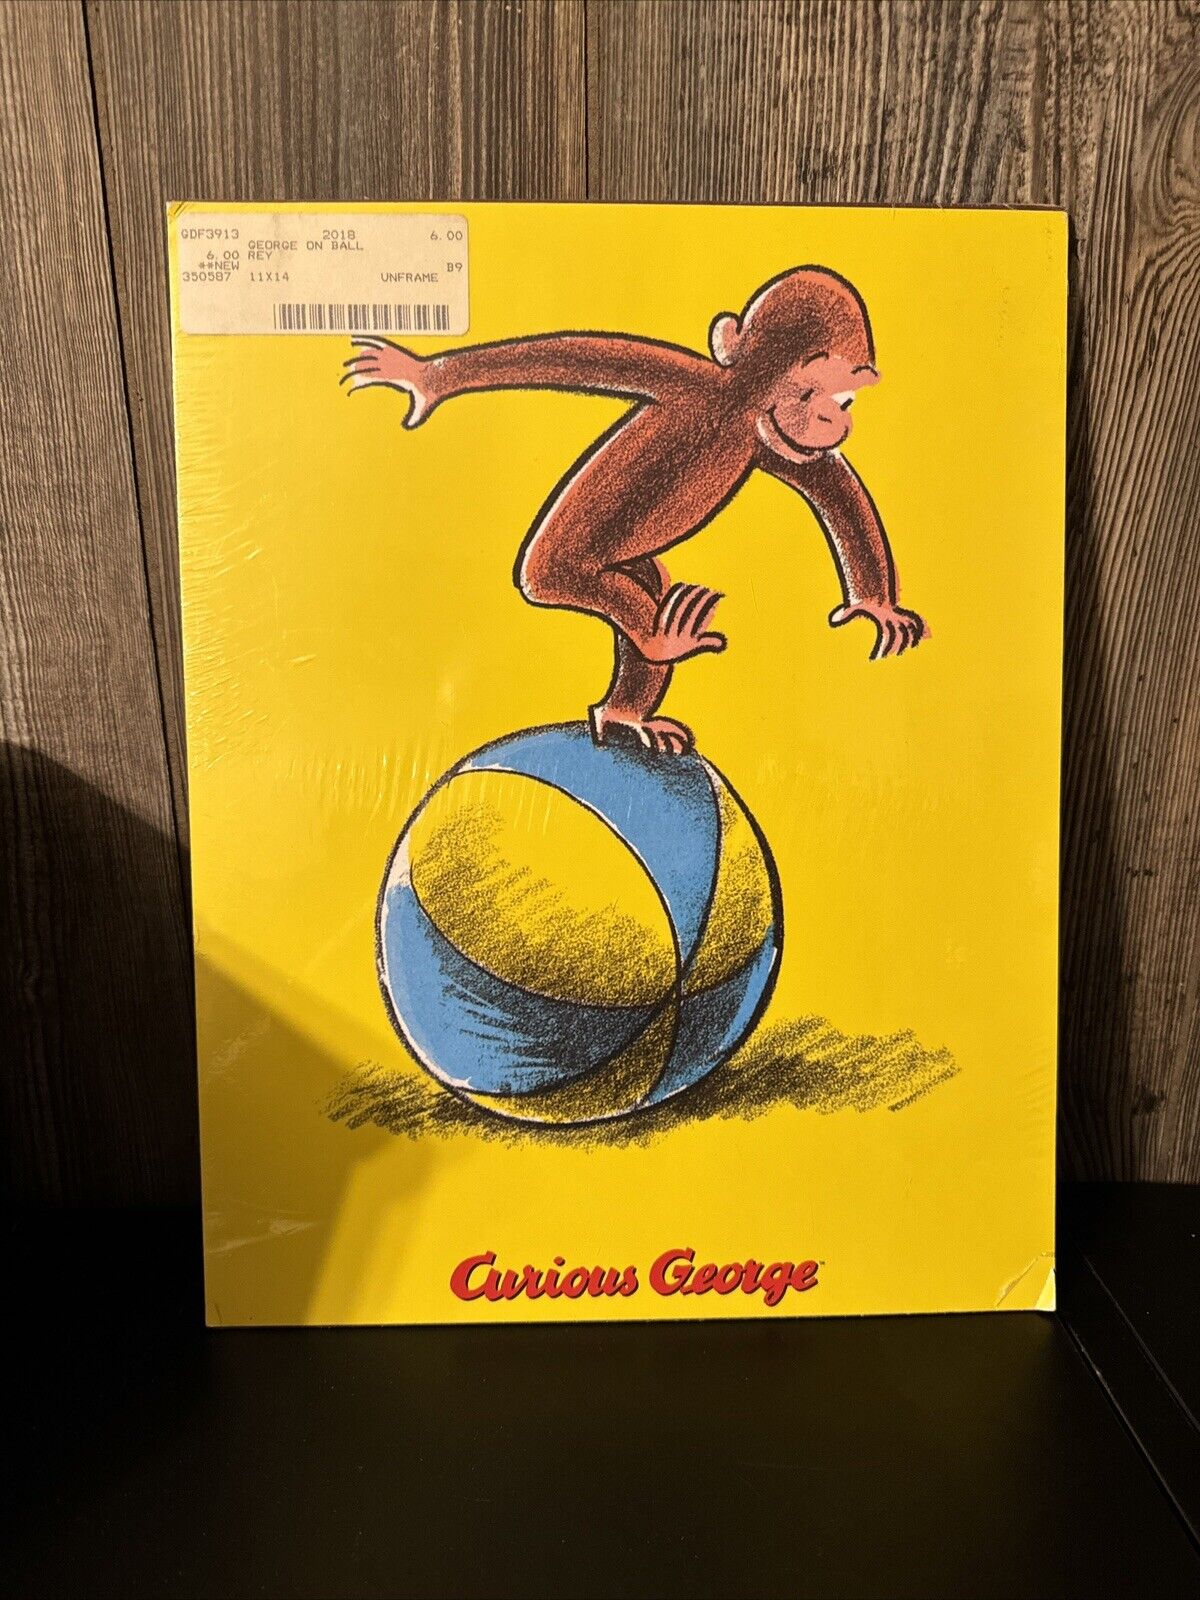 2004 CURIOUS GEORGE PLAYS ON A BALL PICTURE BOYS And George With Bunny